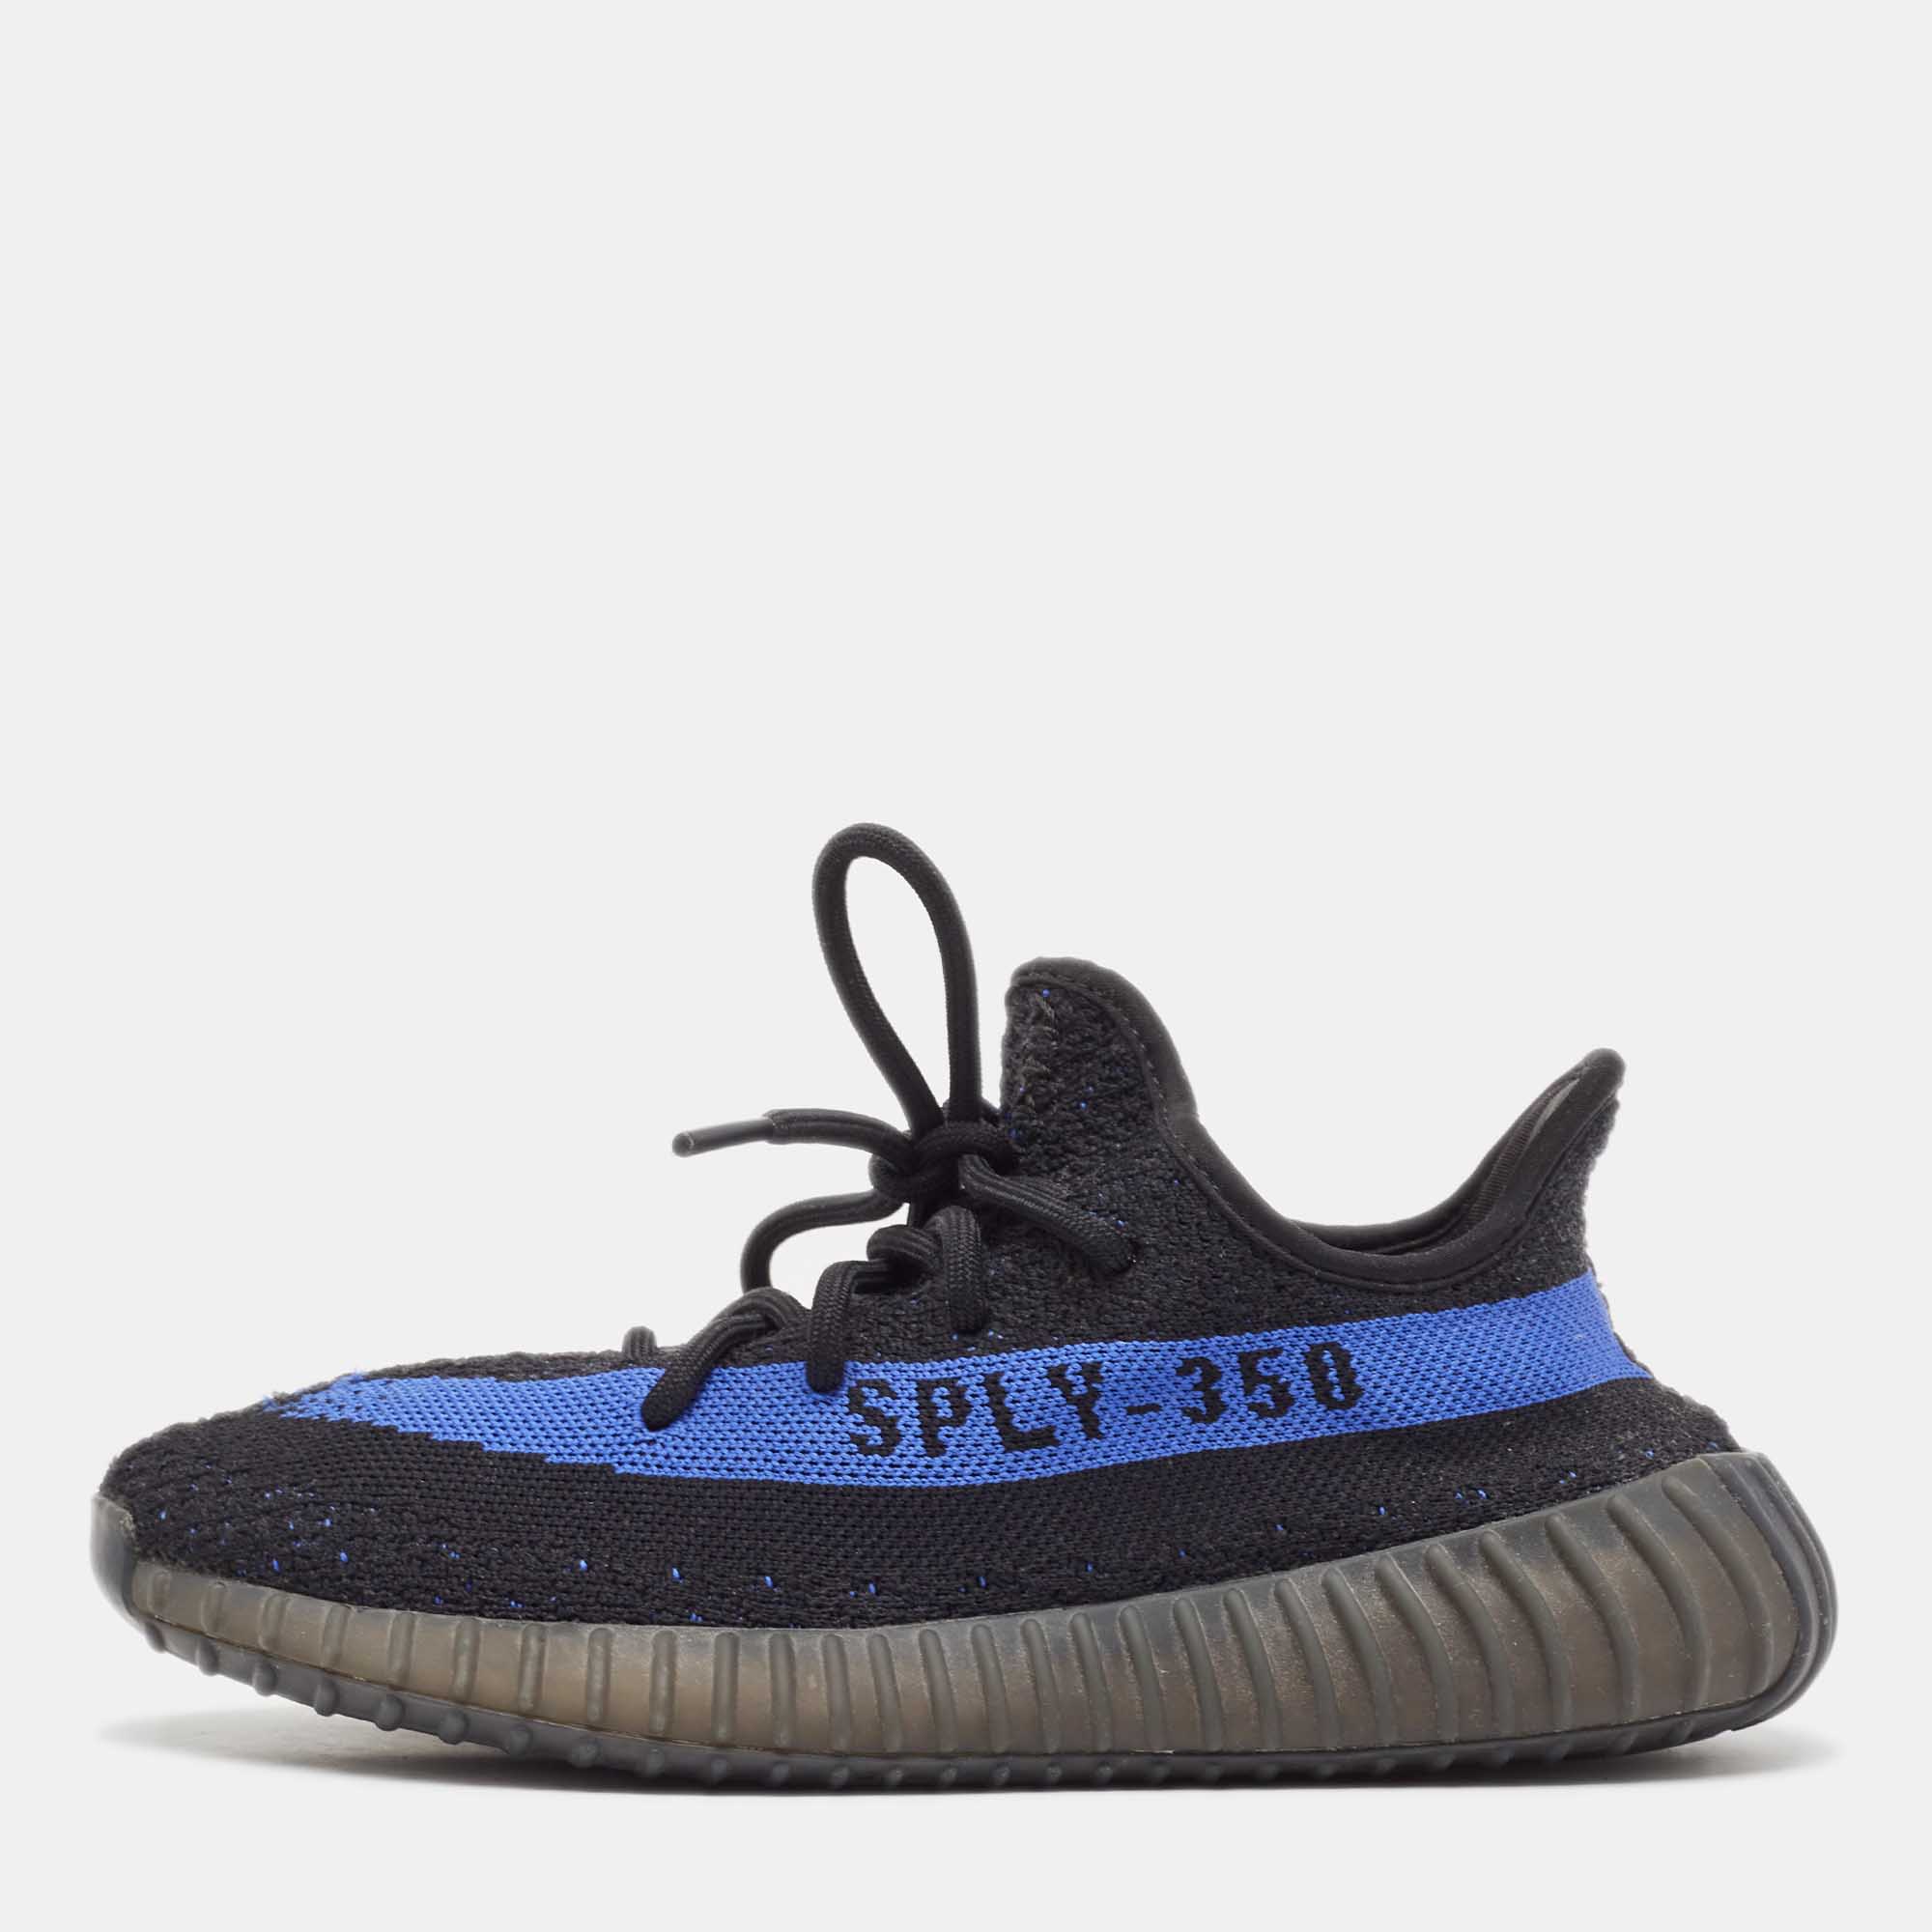 

Yeezy x Adidas Black/Blue Knit Fabric Boost 350 V2 Dazzling Blue Sneakers Size 38 2/3